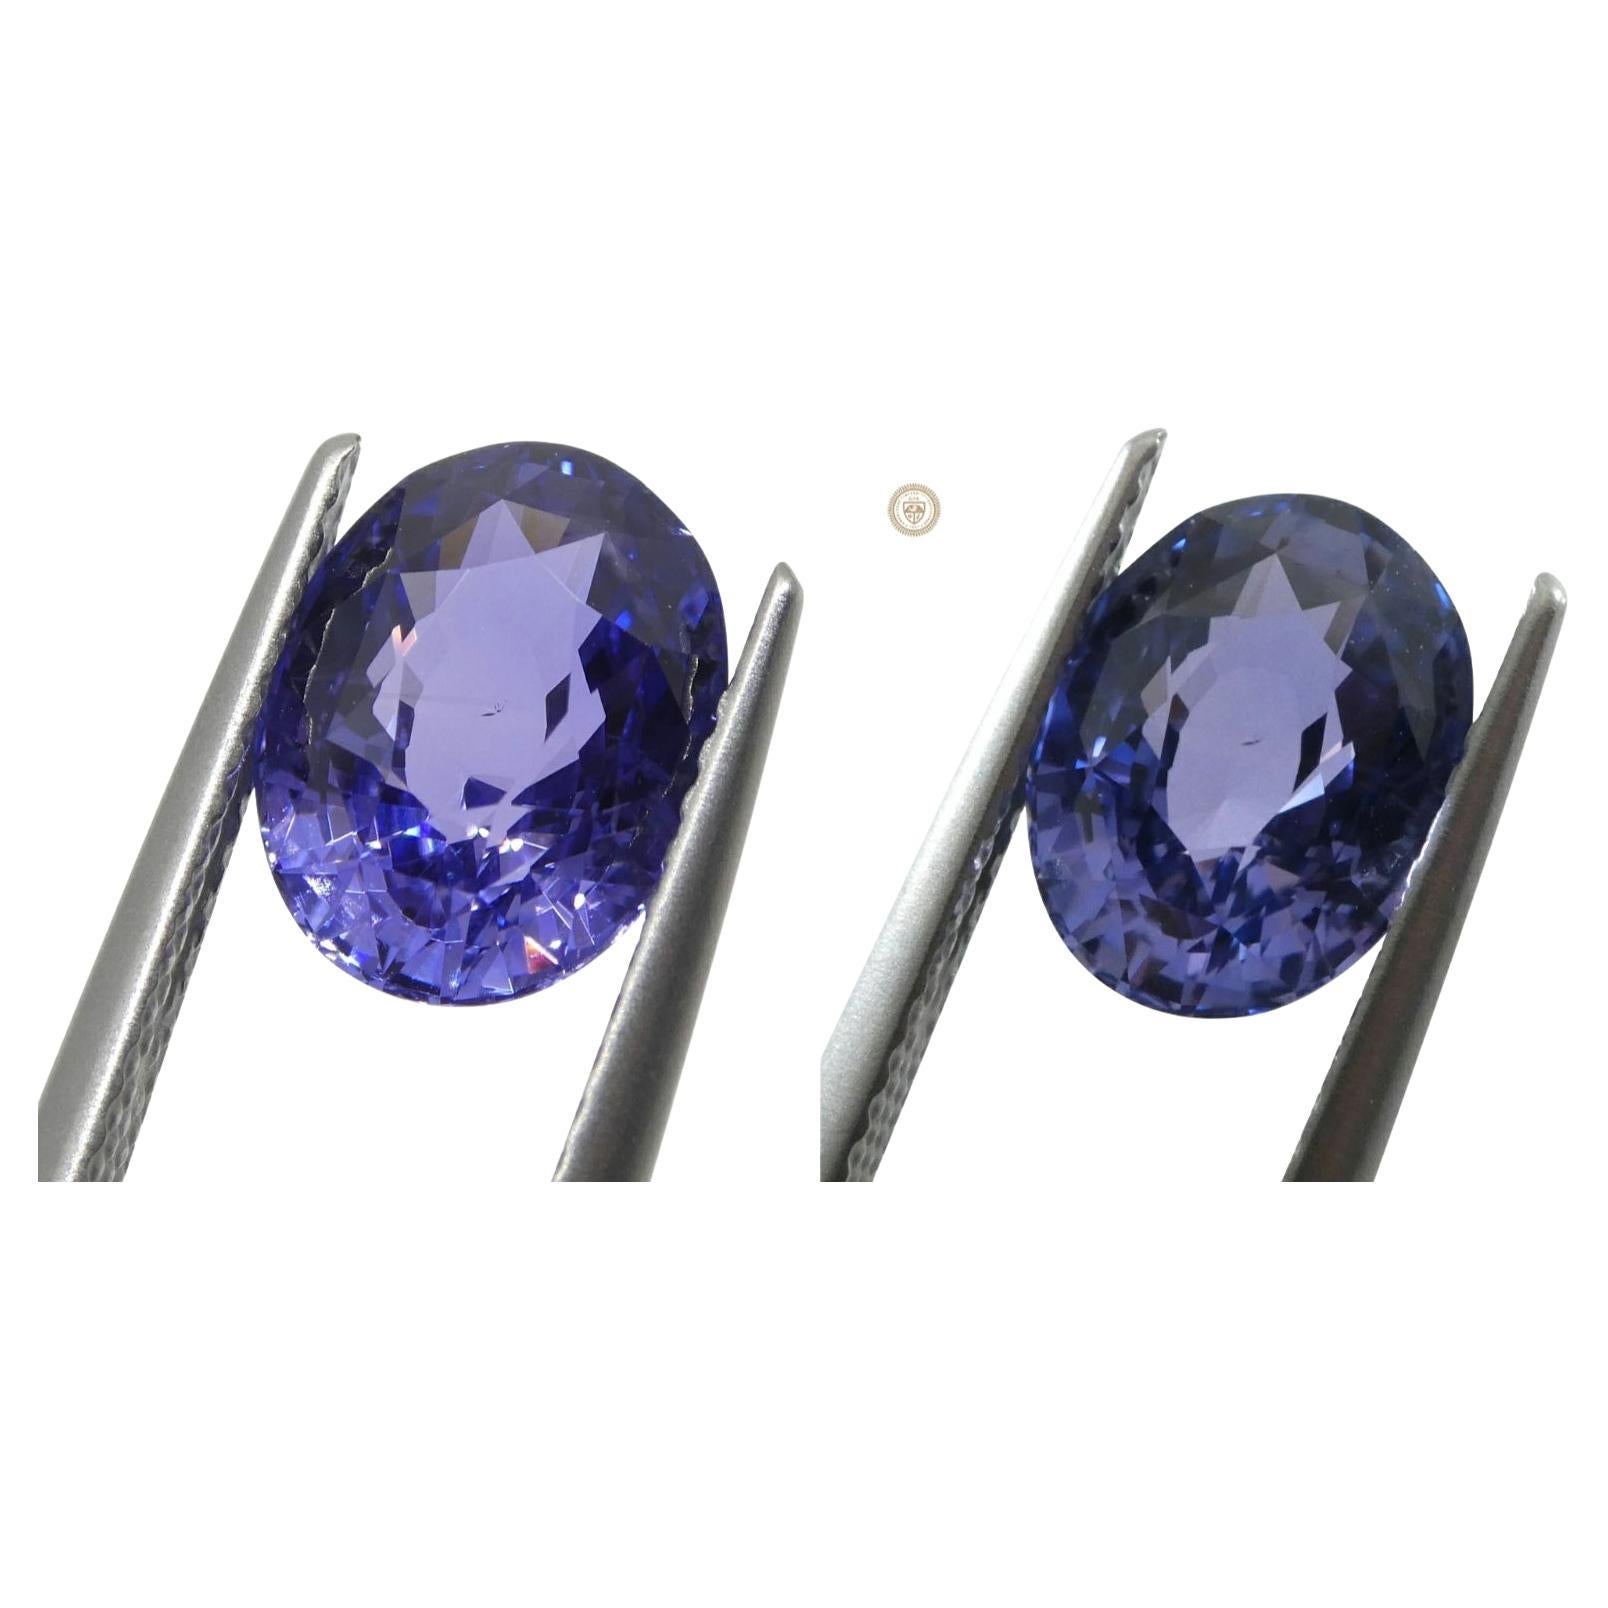 3.24ct Color Change Sapphire GIA Unheated, Bluish Violet to Pinkish Purple For Sale